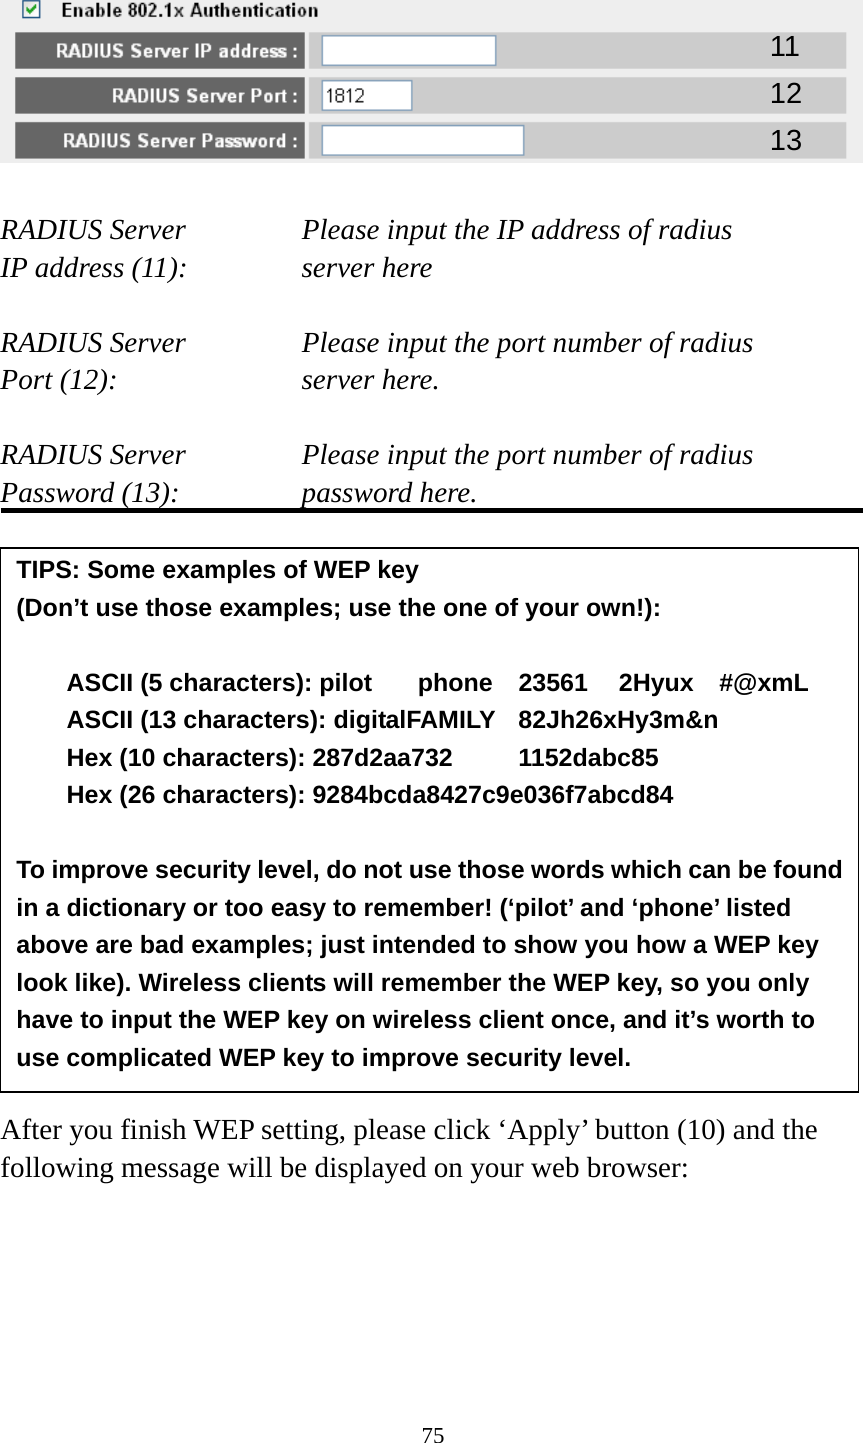 75    RADIUS Server      Please input the IP address of radius   IP address (11):      server here  RADIUS Server      Please input the port number of radius Port (12):    server here.  RADIUS Server      Please input the port number of radius Password (13):      password here.                 After you finish WEP setting, please click ‘Apply’ button (10) and the following message will be displayed on your web browser:  11 12 13 TIPS: Some examples of WEP key   (Don’t use those examples; use the one of your own!):  ASCII (5 characters): pilot    phone    23561    2Hyux    #@xmL ASCII (13 characters): digitalFAMILY  82Jh26xHy3m&amp;n Hex (10 characters): 287d2aa732   1152dabc85 Hex (26 characters): 9284bcda8427c9e036f7abcd84  To improve security level, do not use those words which can be found in a dictionary or too easy to remember! (‘pilot’ and ‘phone’ listed above are bad examples; just intended to show you how a WEP key look like). Wireless clients will remember the WEP key, so you only have to input the WEP key on wireless client once, and it’s worth to use complicated WEP key to improve security level. 